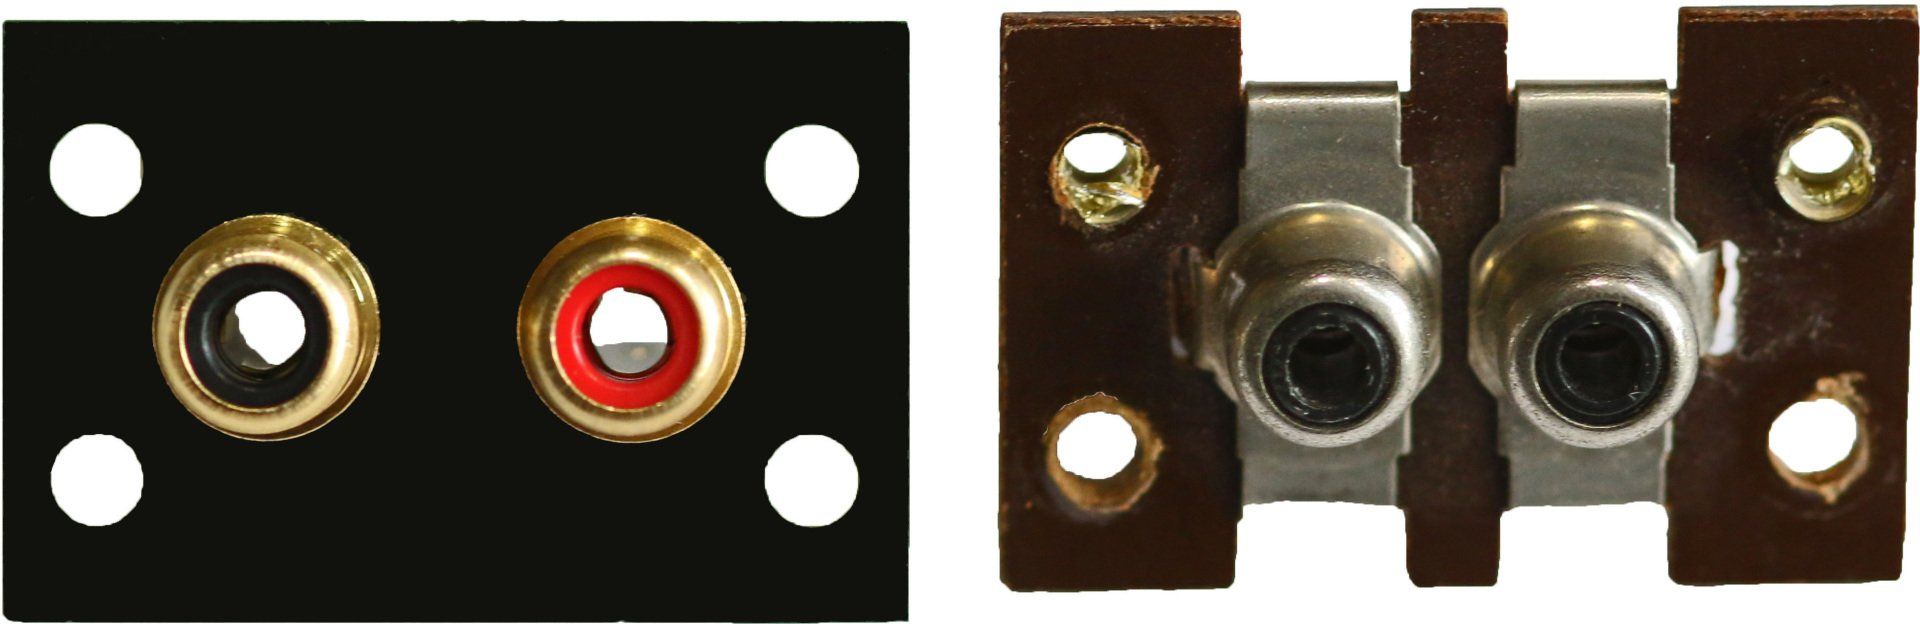 new (revox-online) and old (Revox) connector